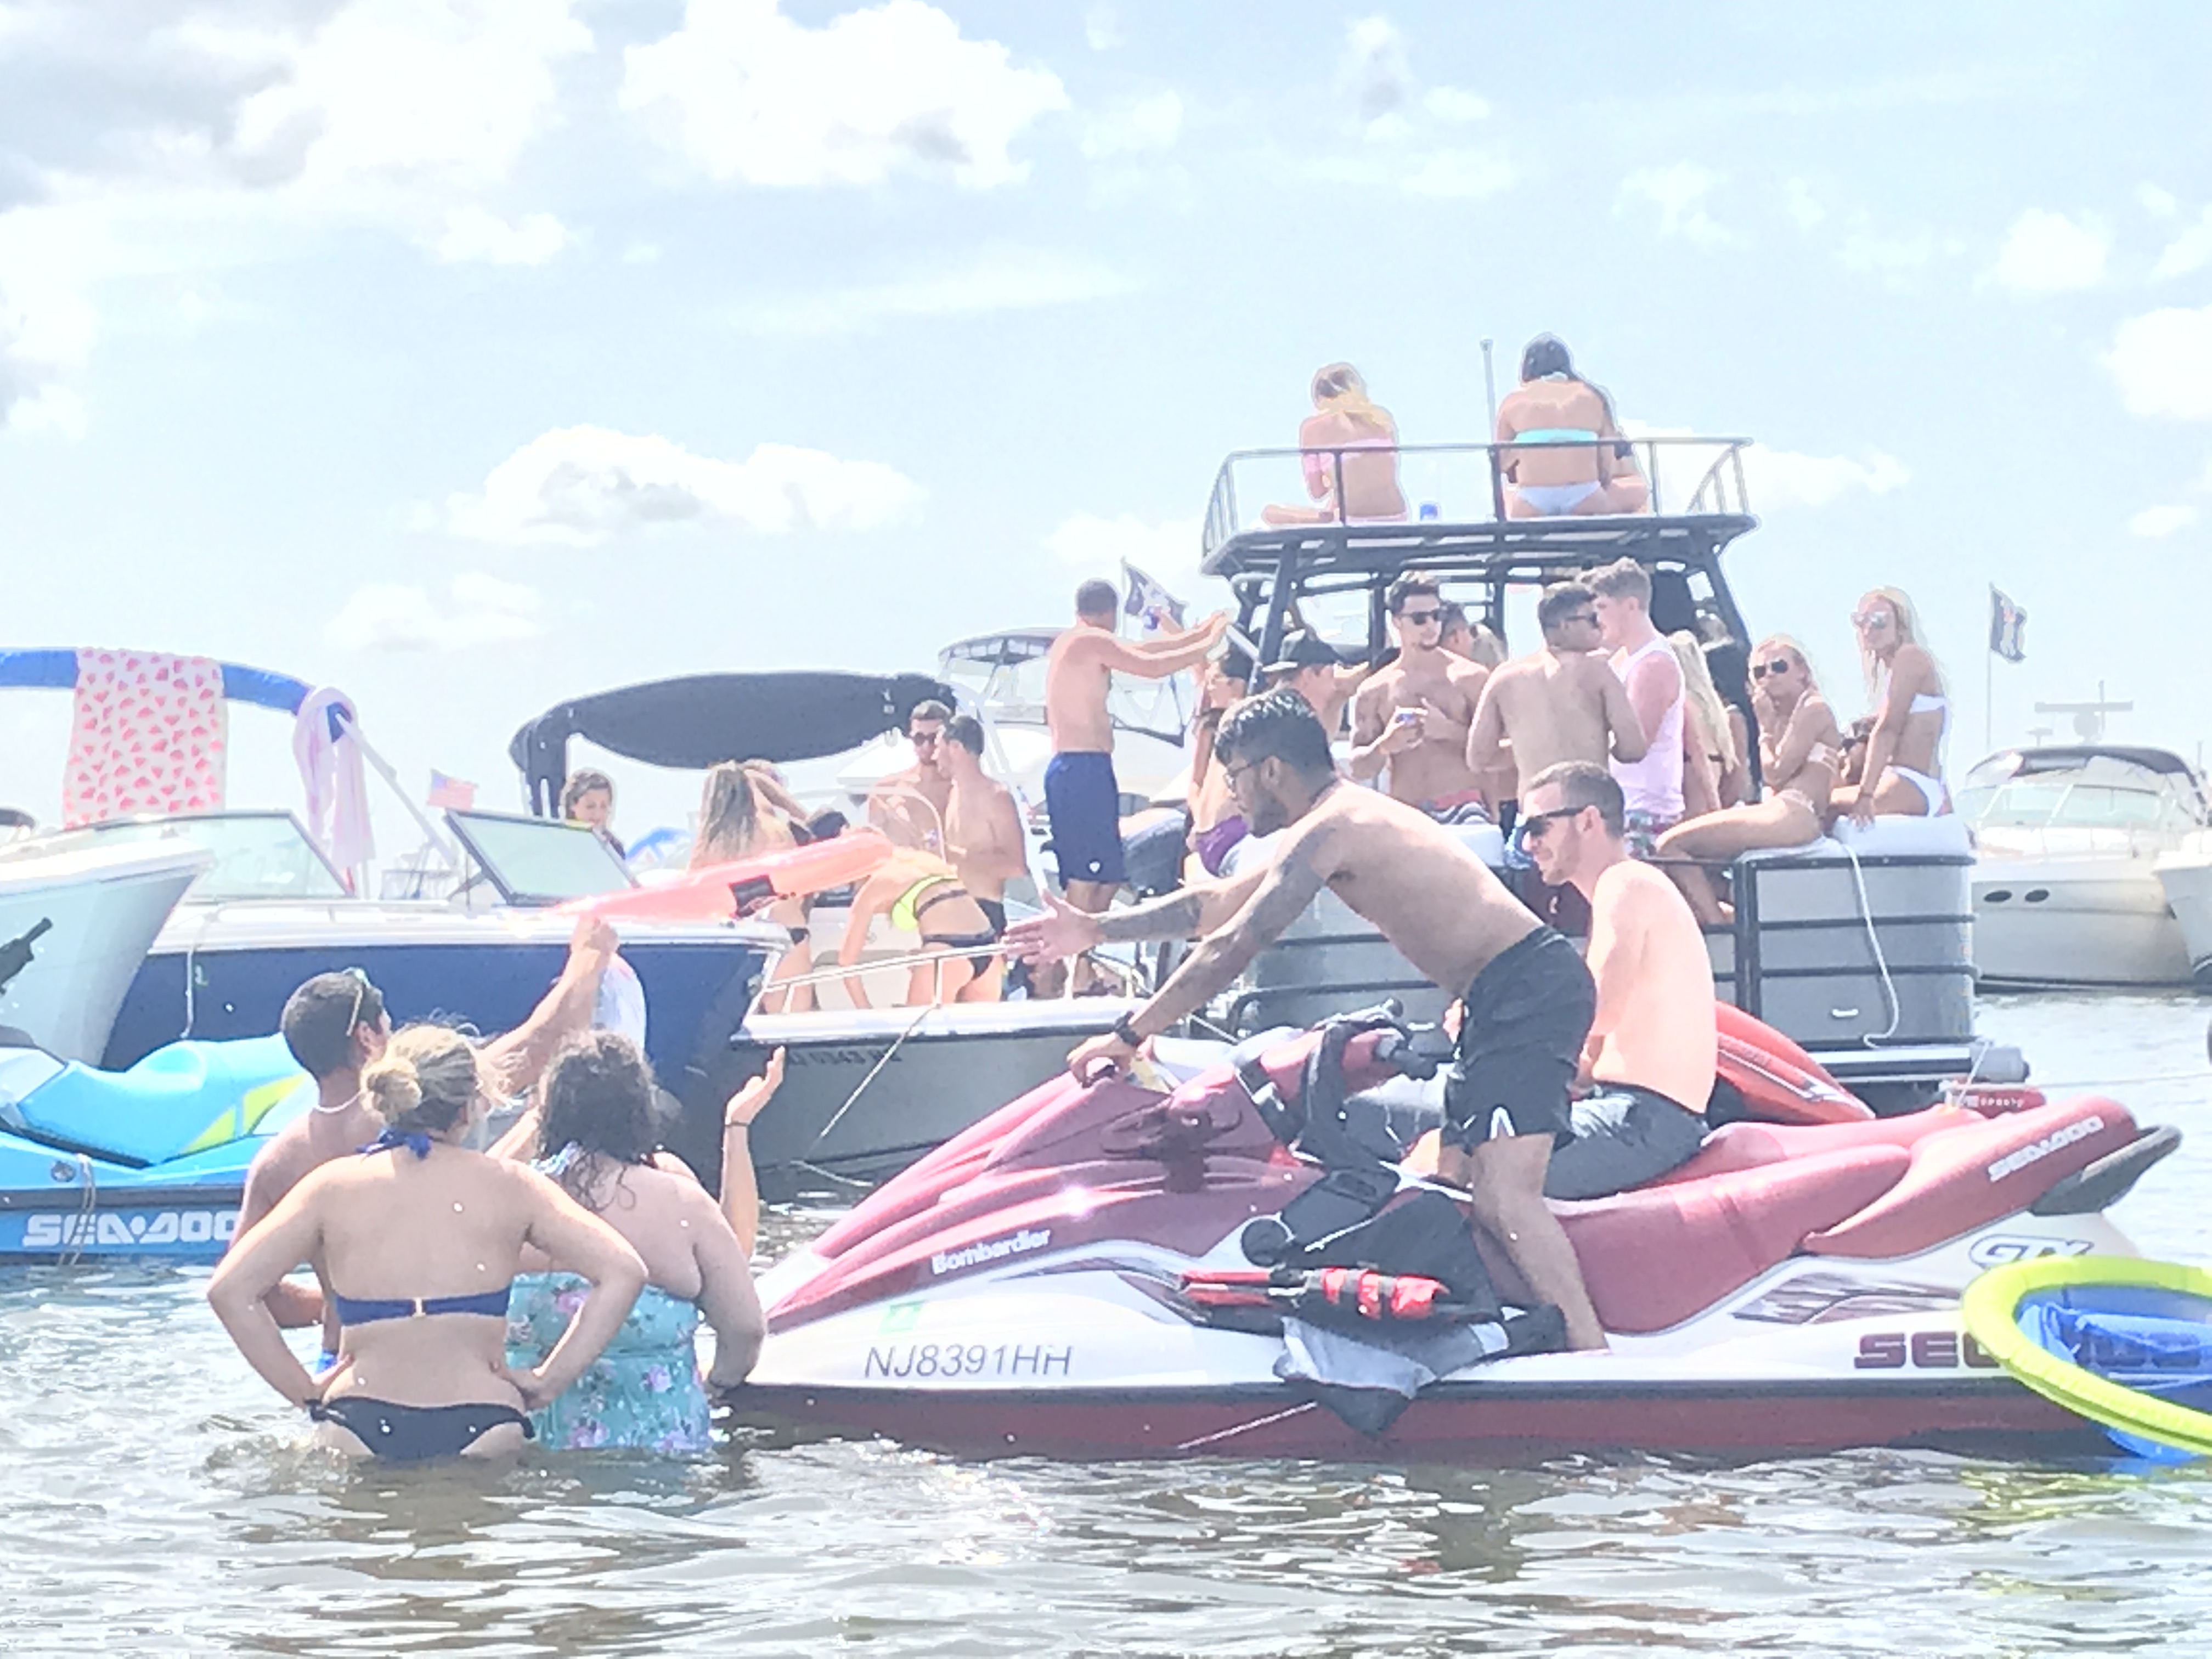 ‘Floatchella’ Brings Thousands to Tices Shoal Here Are Our Favorite